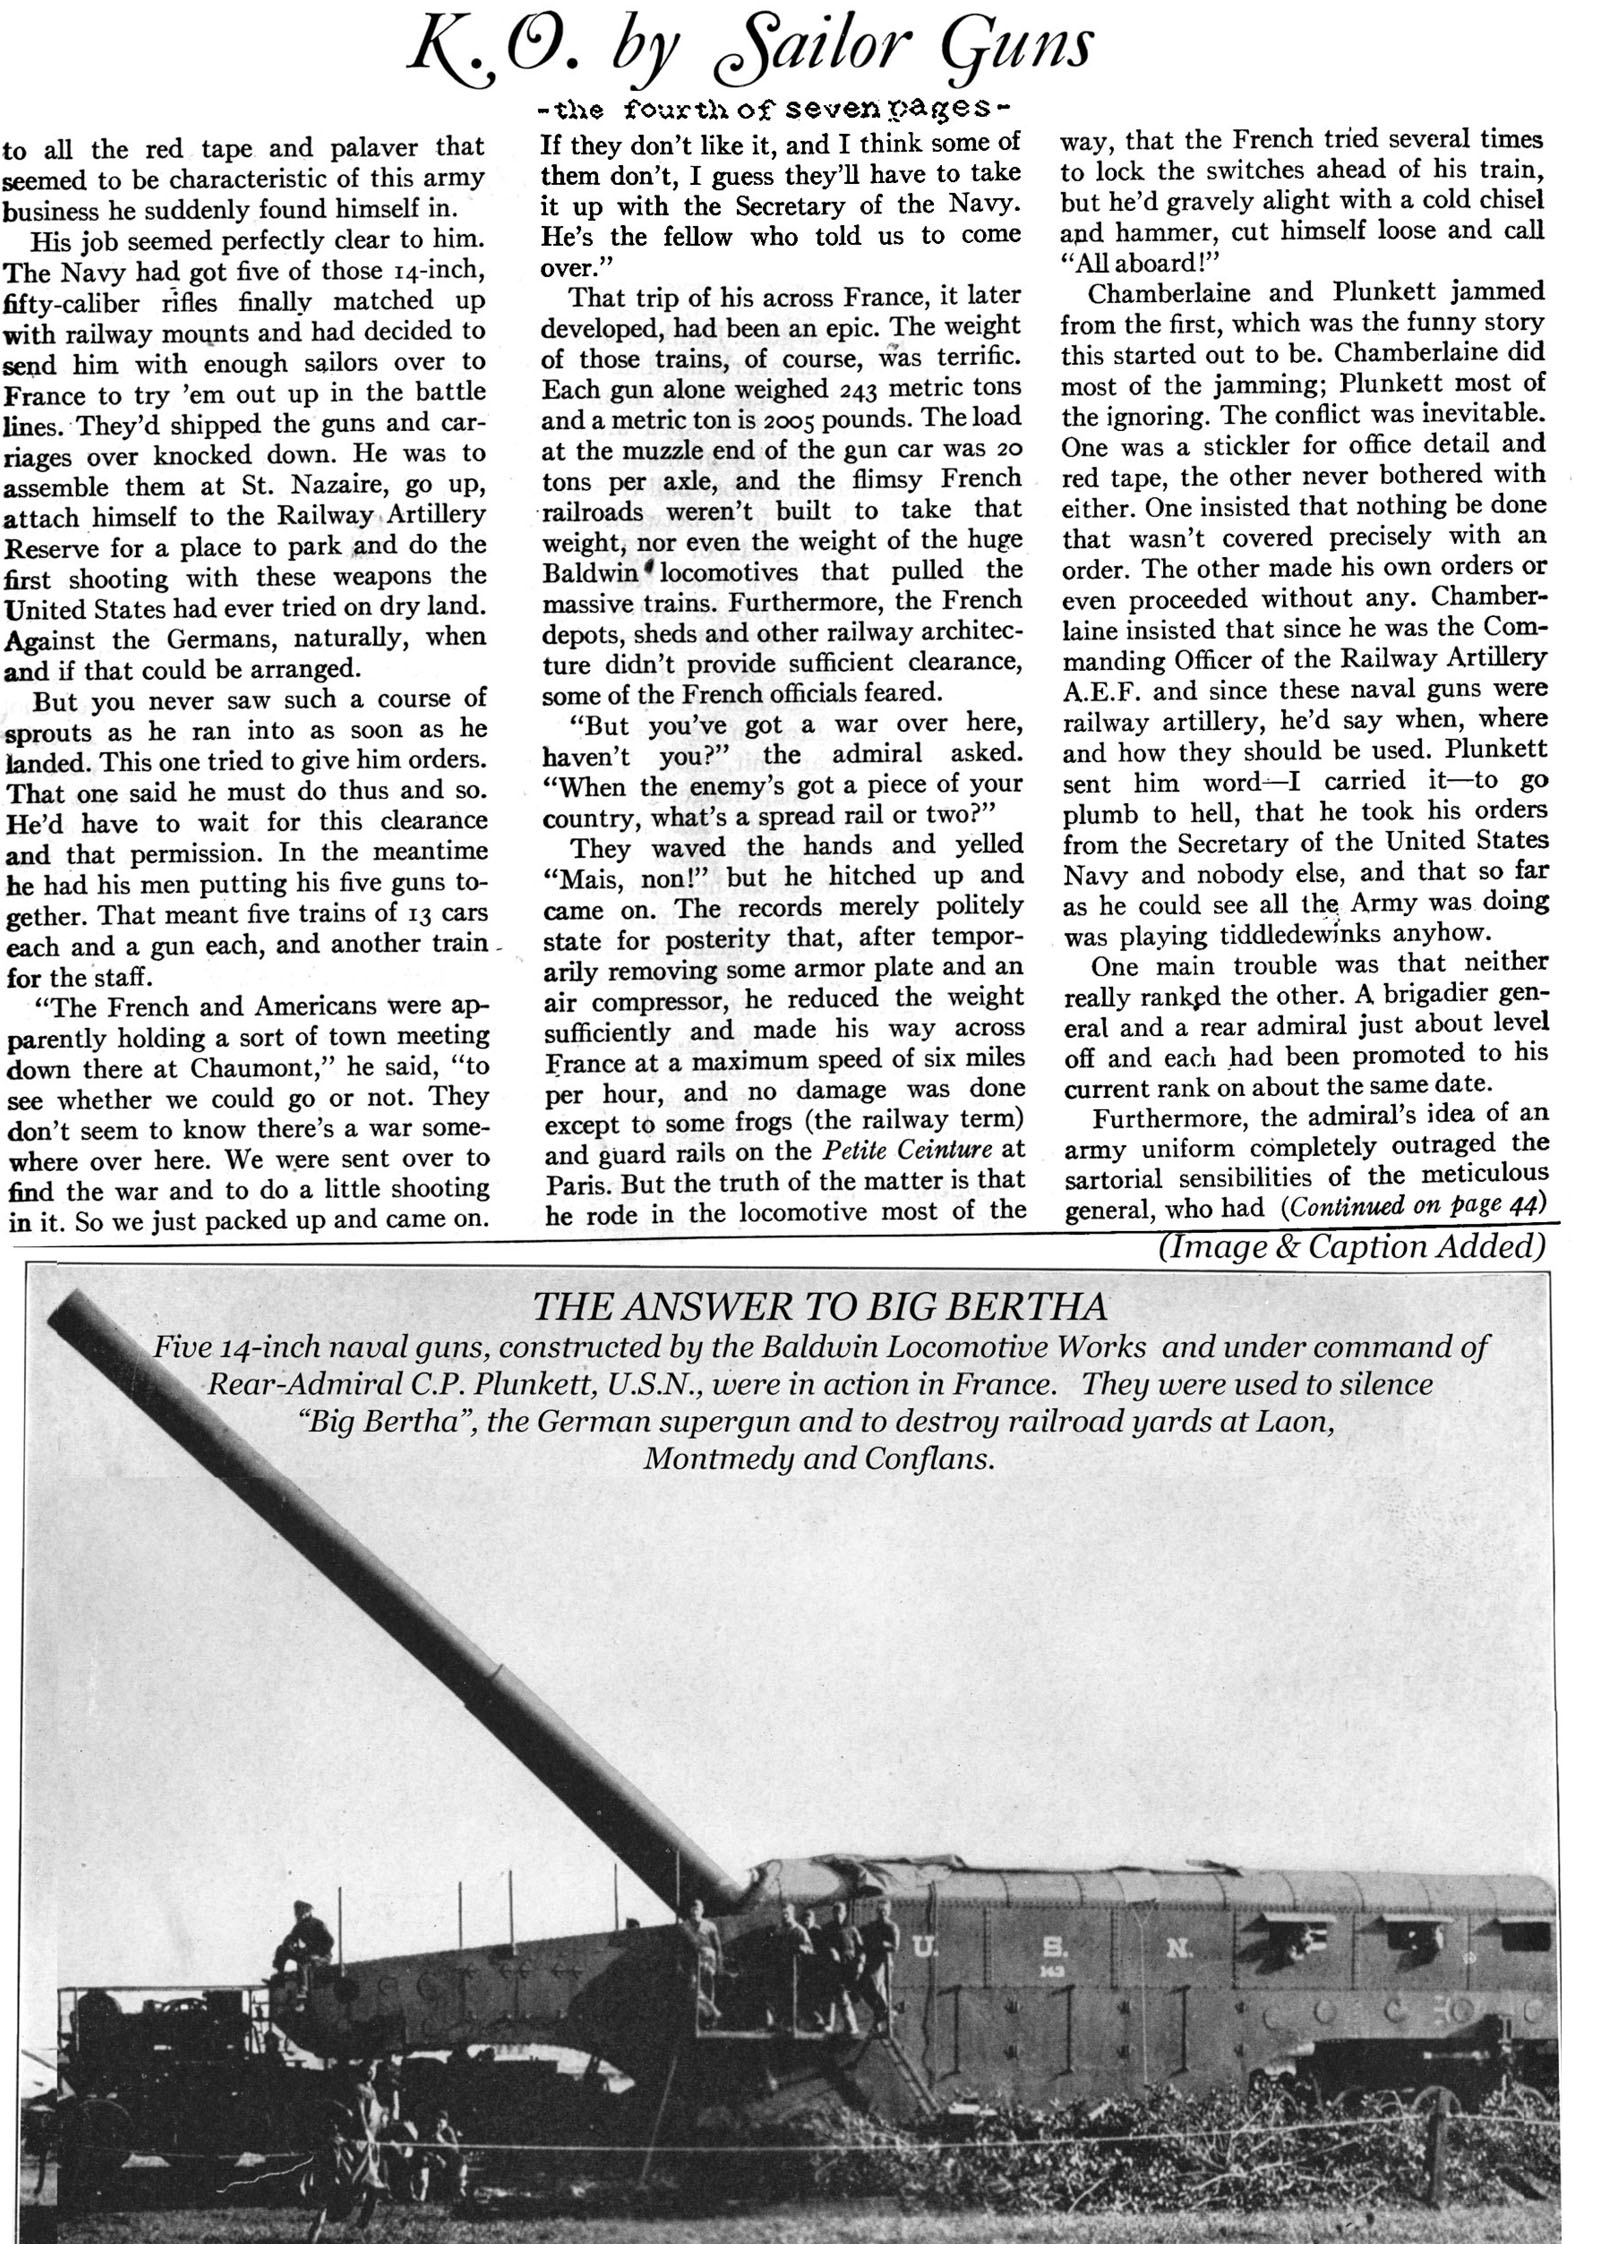 With the Sailor Guns in France (The American Legion Magazine, 1940)